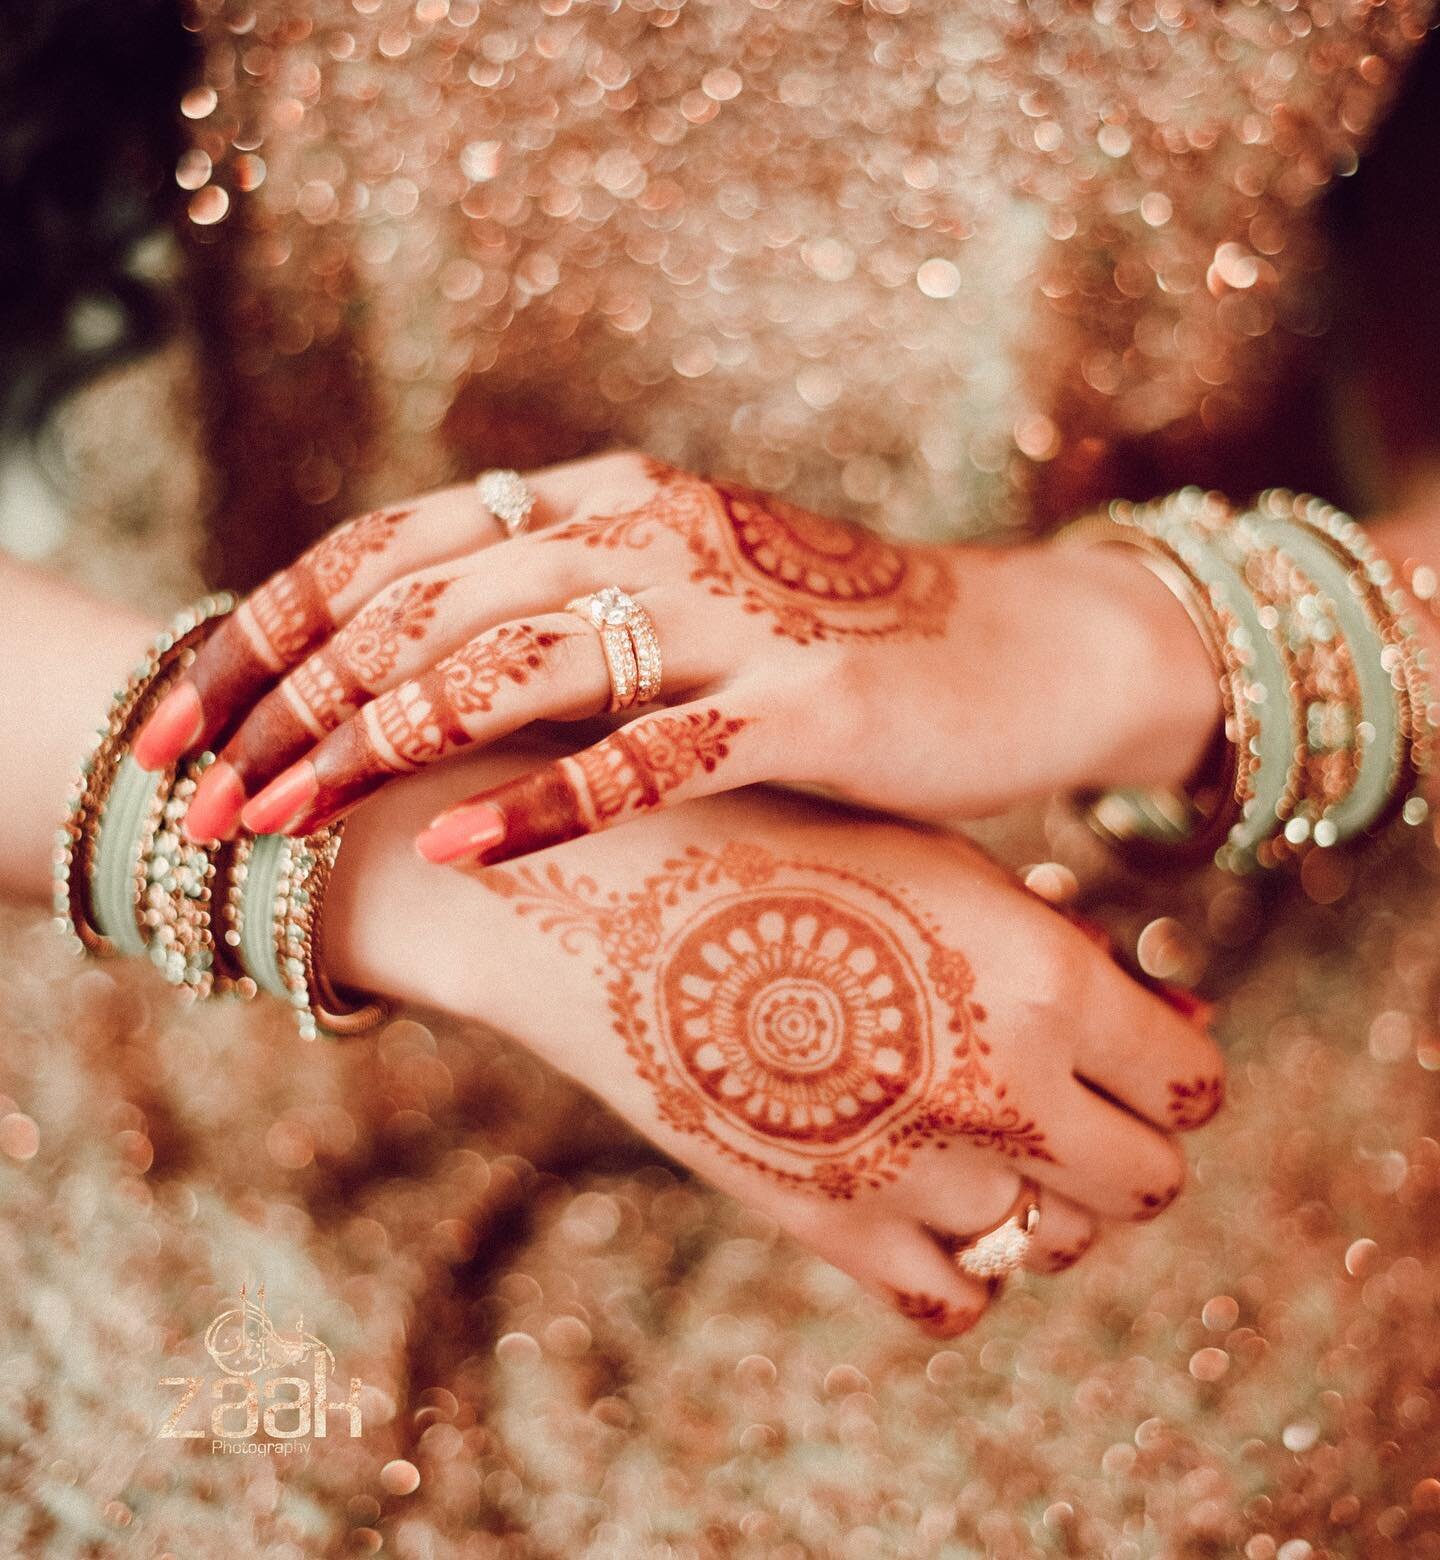 Something about the simple mehndi is just so beautiful... 
Glad to see more and more of the traditional designs make a come back.. 
xox
Zahra 
#zaak #zaakphotography #weddingmehndi #mehndistain #mehndidesigns #mehndibride #henna #weddingphotographers